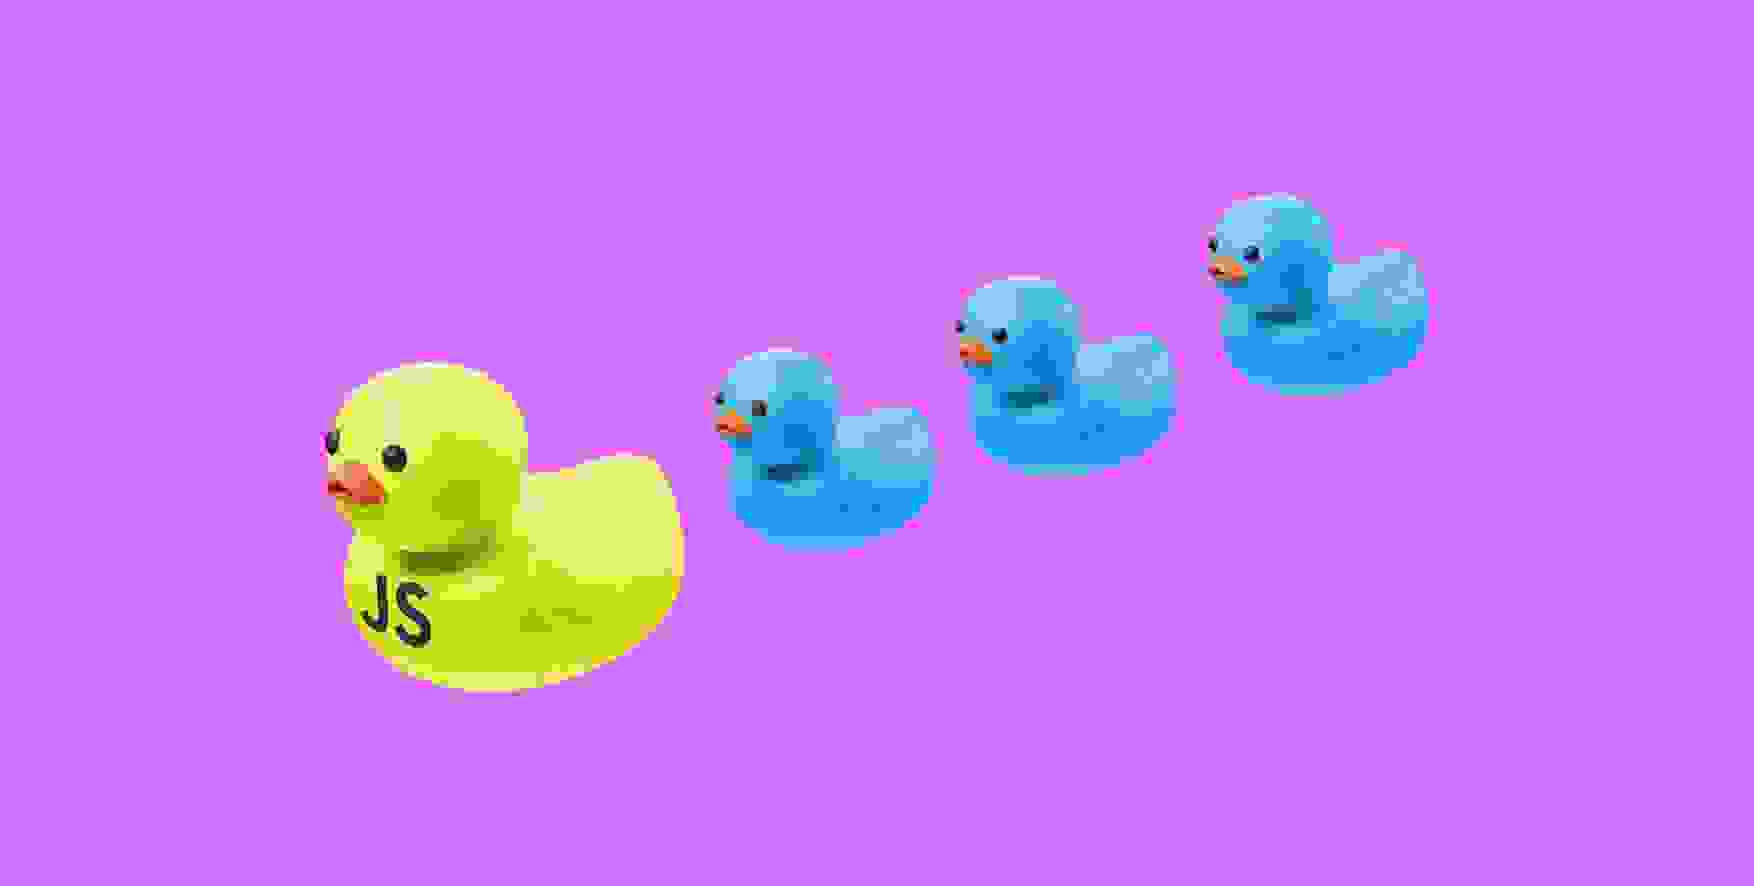 yellow duck with abbreviation JS and three blue ducklings